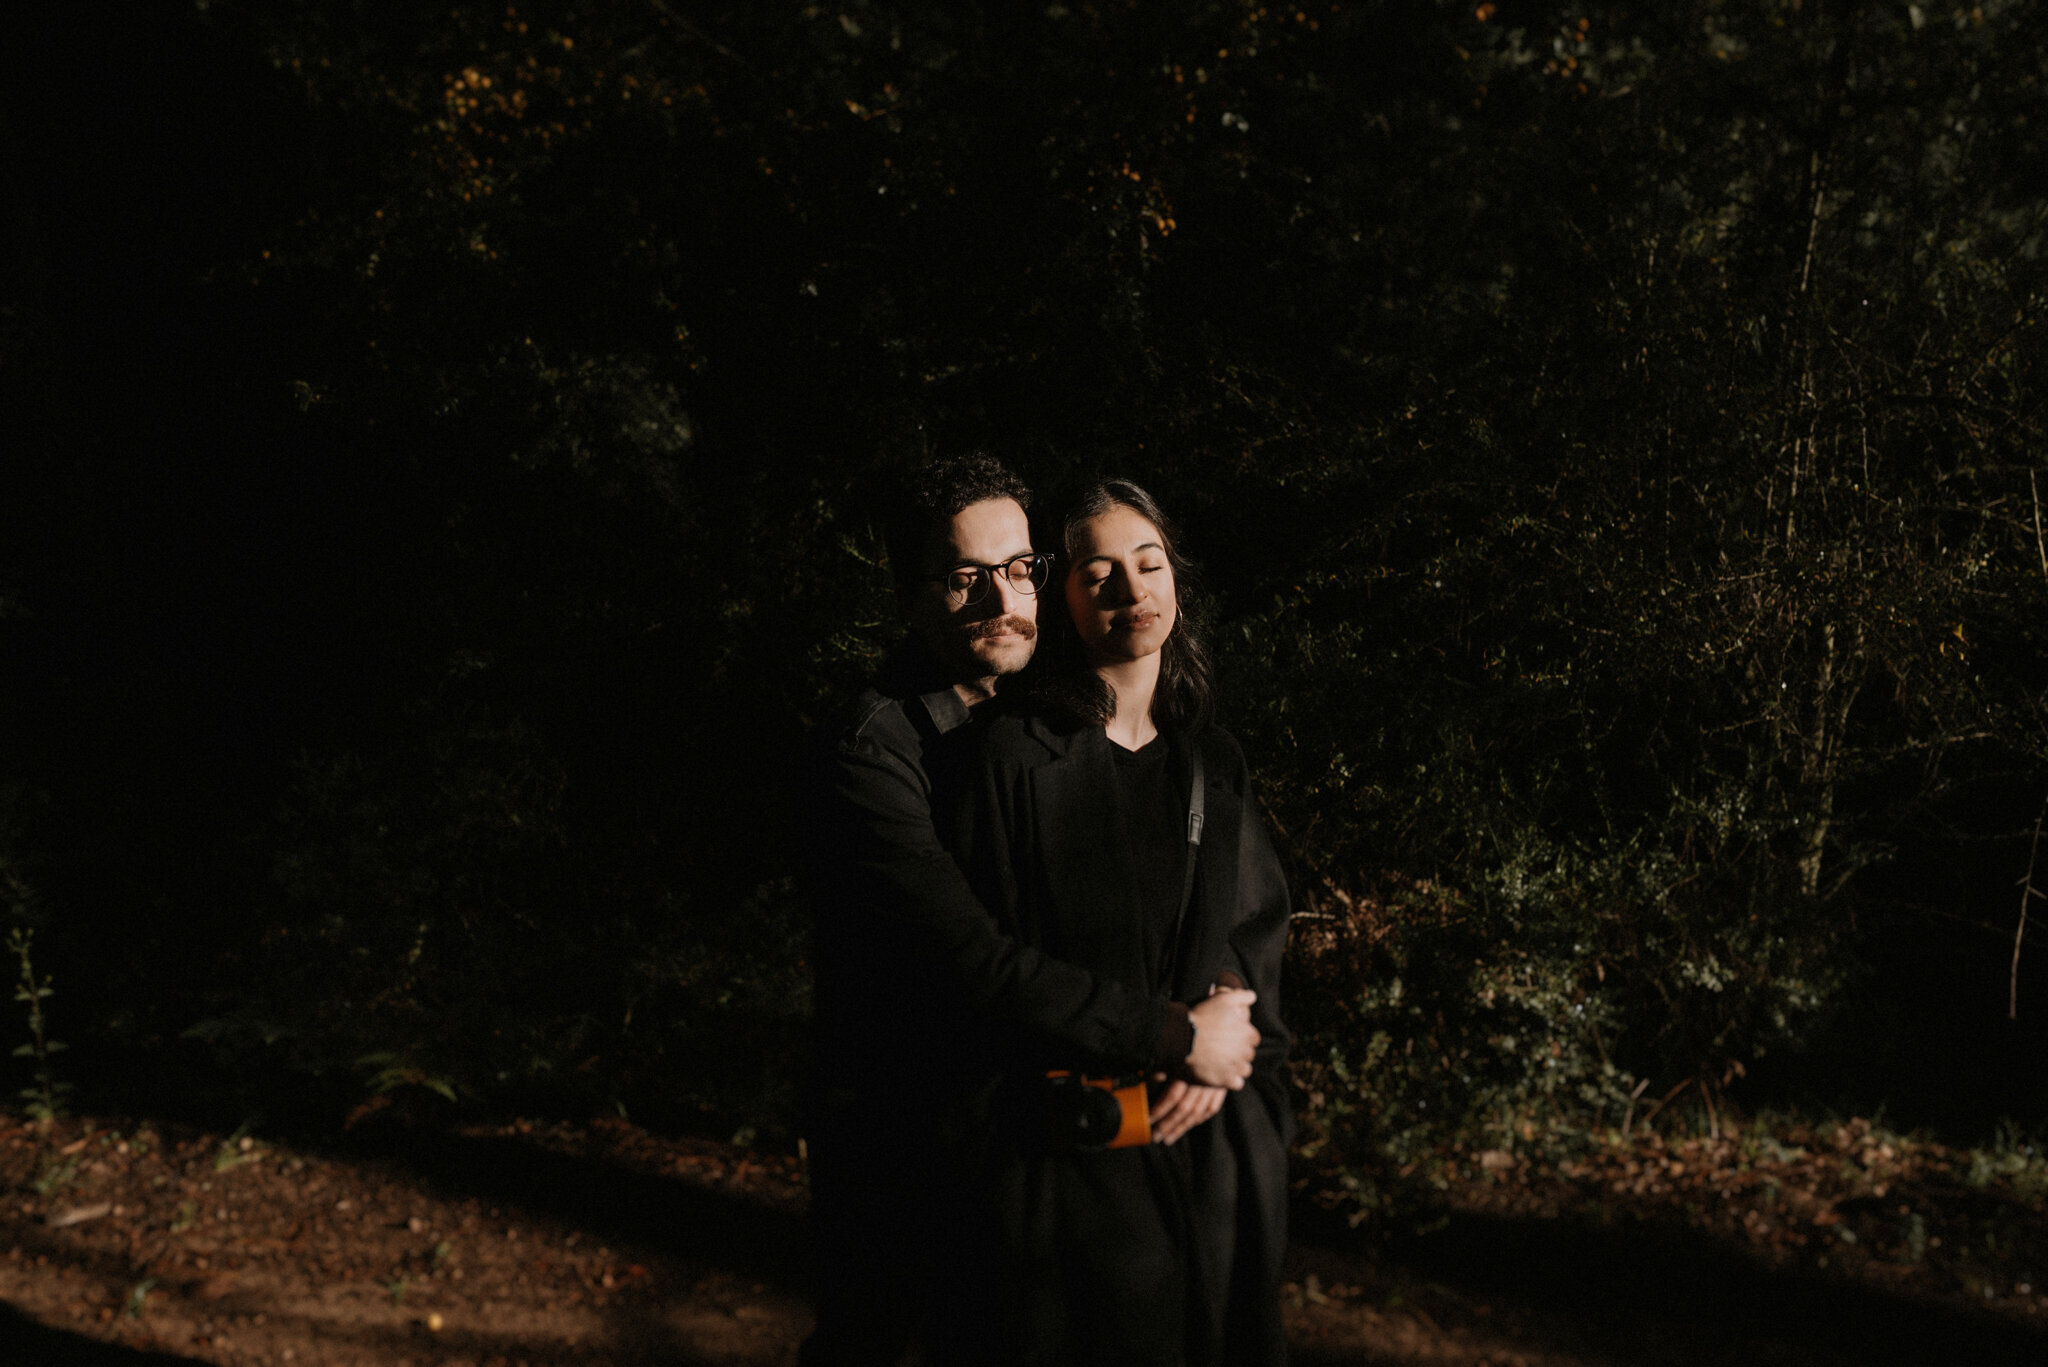 MEXICO COUPLE SESSION - IN THE WOODS - ANNA SAUZA PHOTOGRAPHY -30.jpg